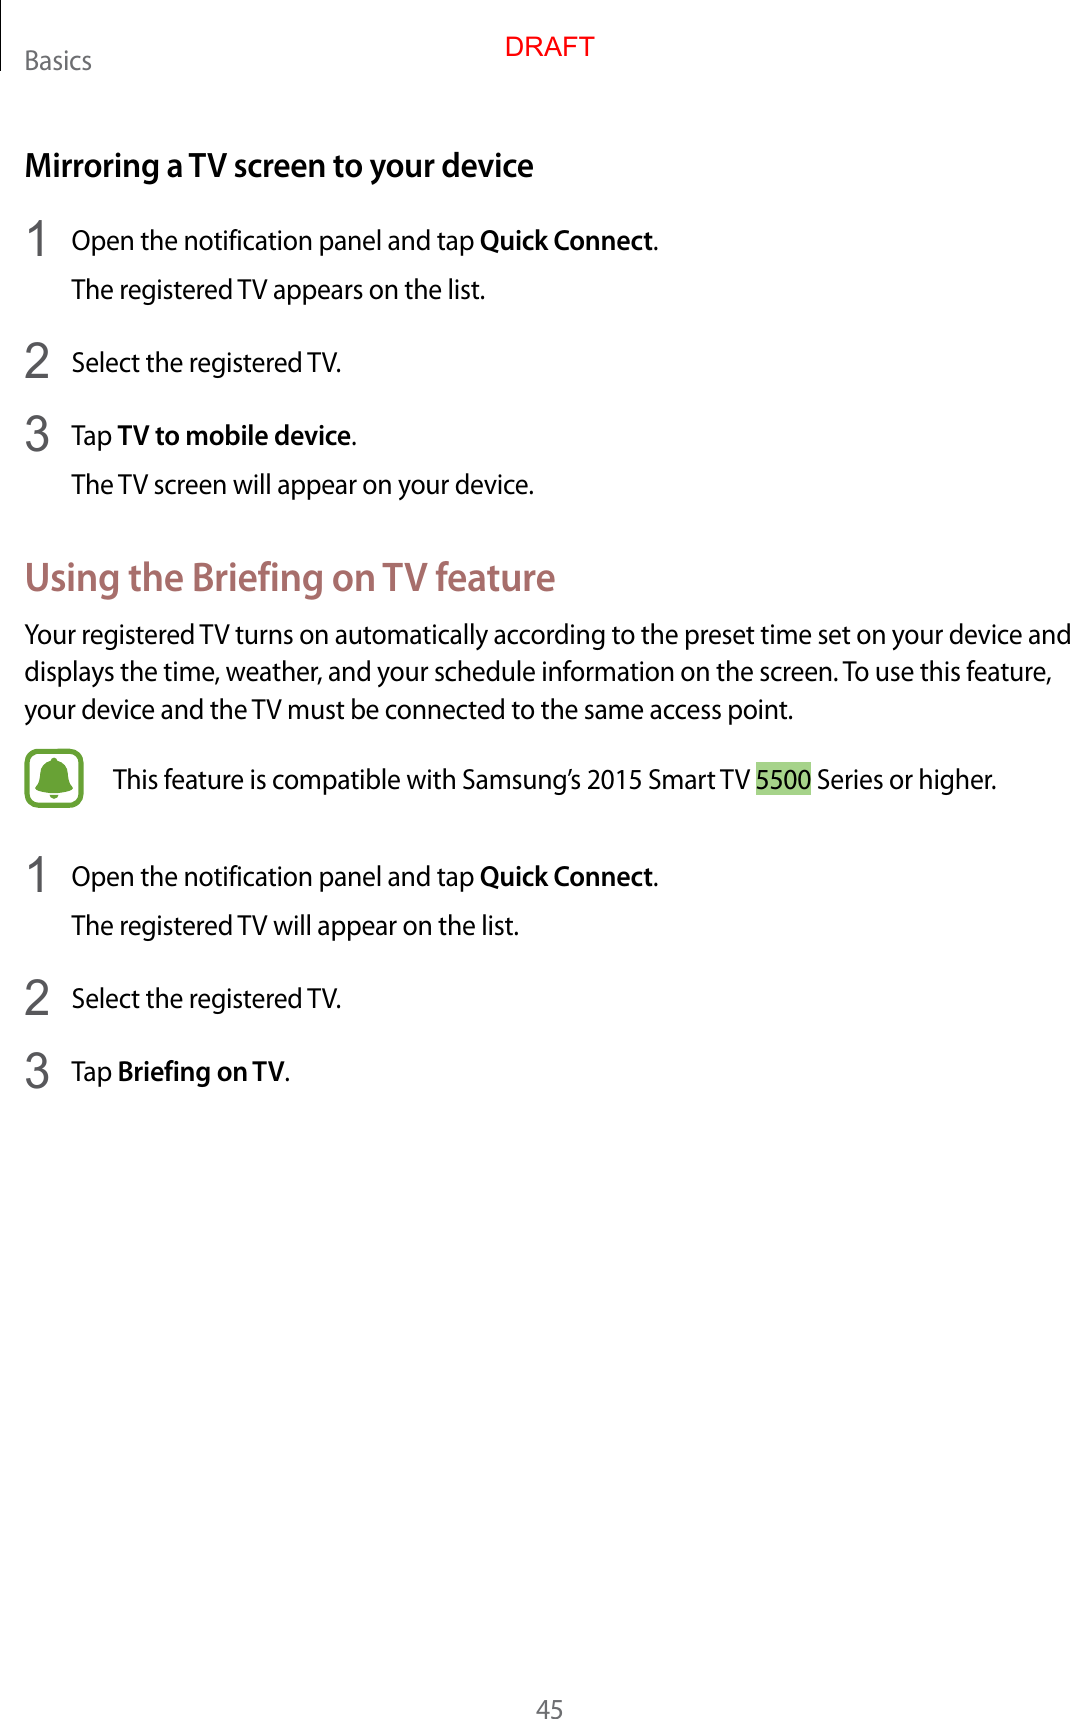 Basics45Mirroring a TV screen to y our devic e1  Open the notification panel and tap Quick Connect.The reg ist er ed TV appears on the list.2  Select the reg ister ed TV.3  Tap TV to mobile device.The TV screen will appear on your devic e .Using the Briefing on TV fea tur eYour register ed TV turns on automatically accor ding t o the pr eset time set on y our device and displays the time , w ea ther, and your schedule information on the scr een. To use this feature , your device and the TV must be connected to the same access point.This f eatur e is c ompatible with Samsung’s 2015 Smart TV 5500 Series or higher.1  Open the notification panel and tap Quick Connect.The reg ist er ed TV will appear on the list.2  Select the reg ister ed TV.3  Tap Briefing on TV.DRAFT